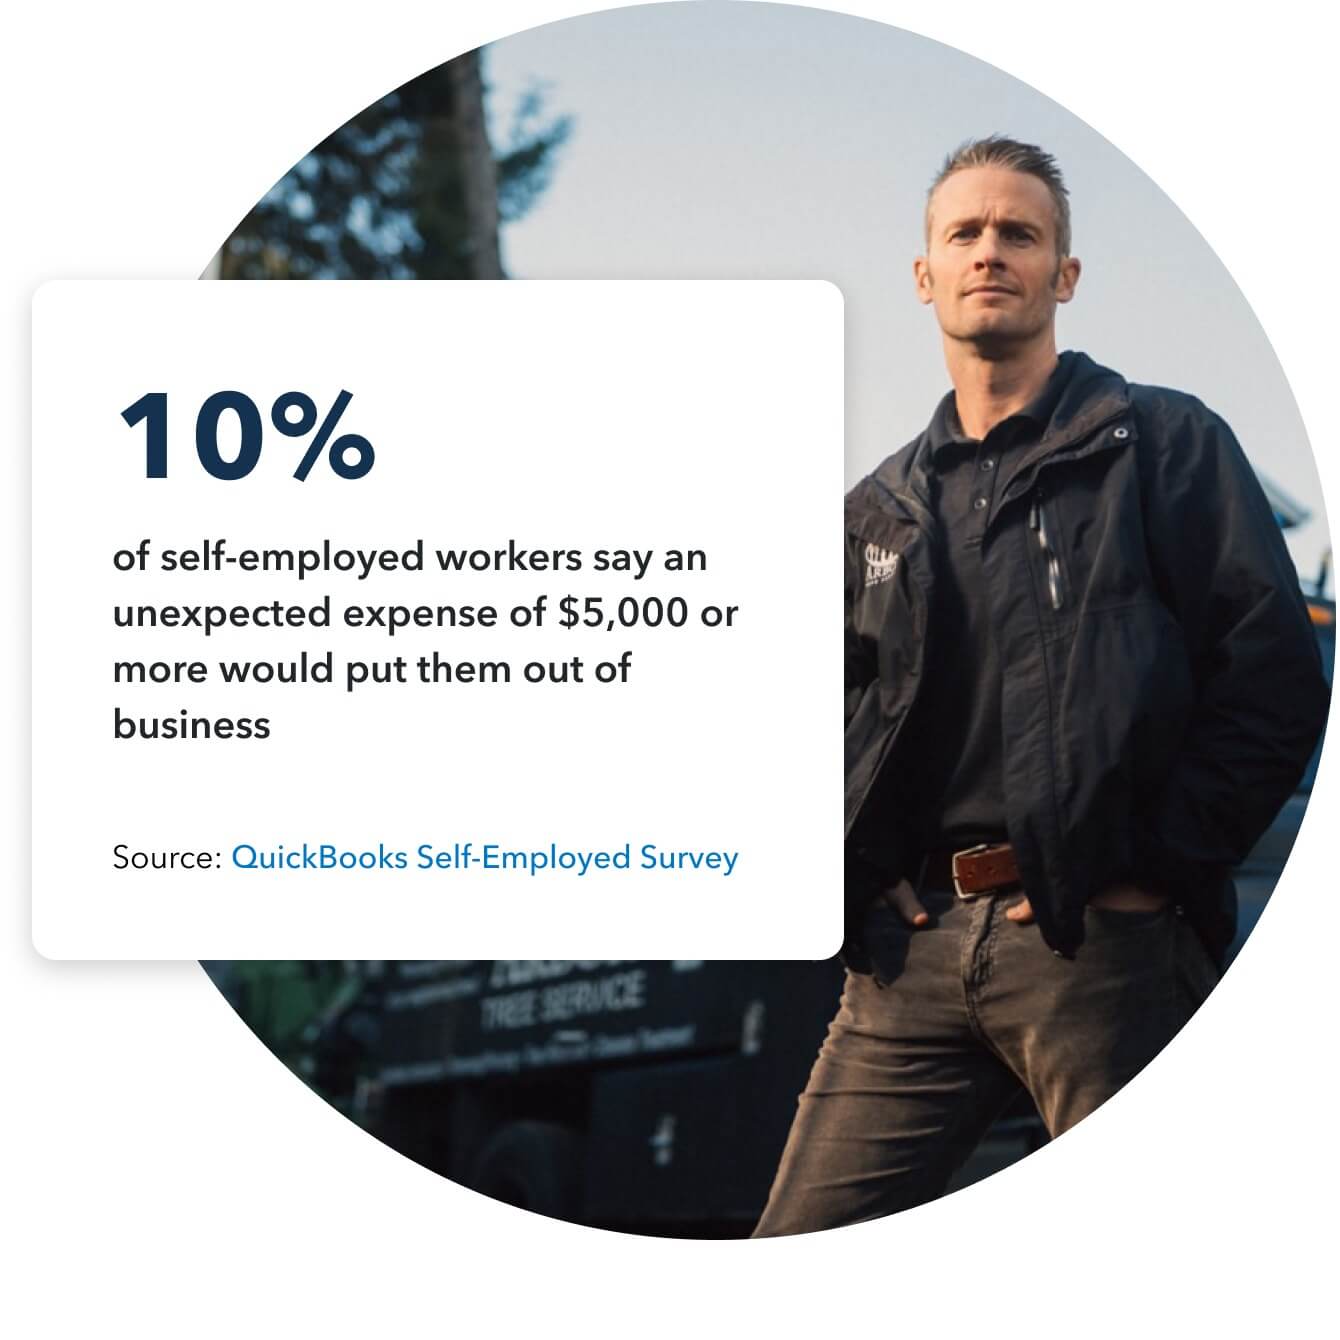 Graphic of 10% percent of self-employed worker say an unexpected expense of $5,000 would put them out of business